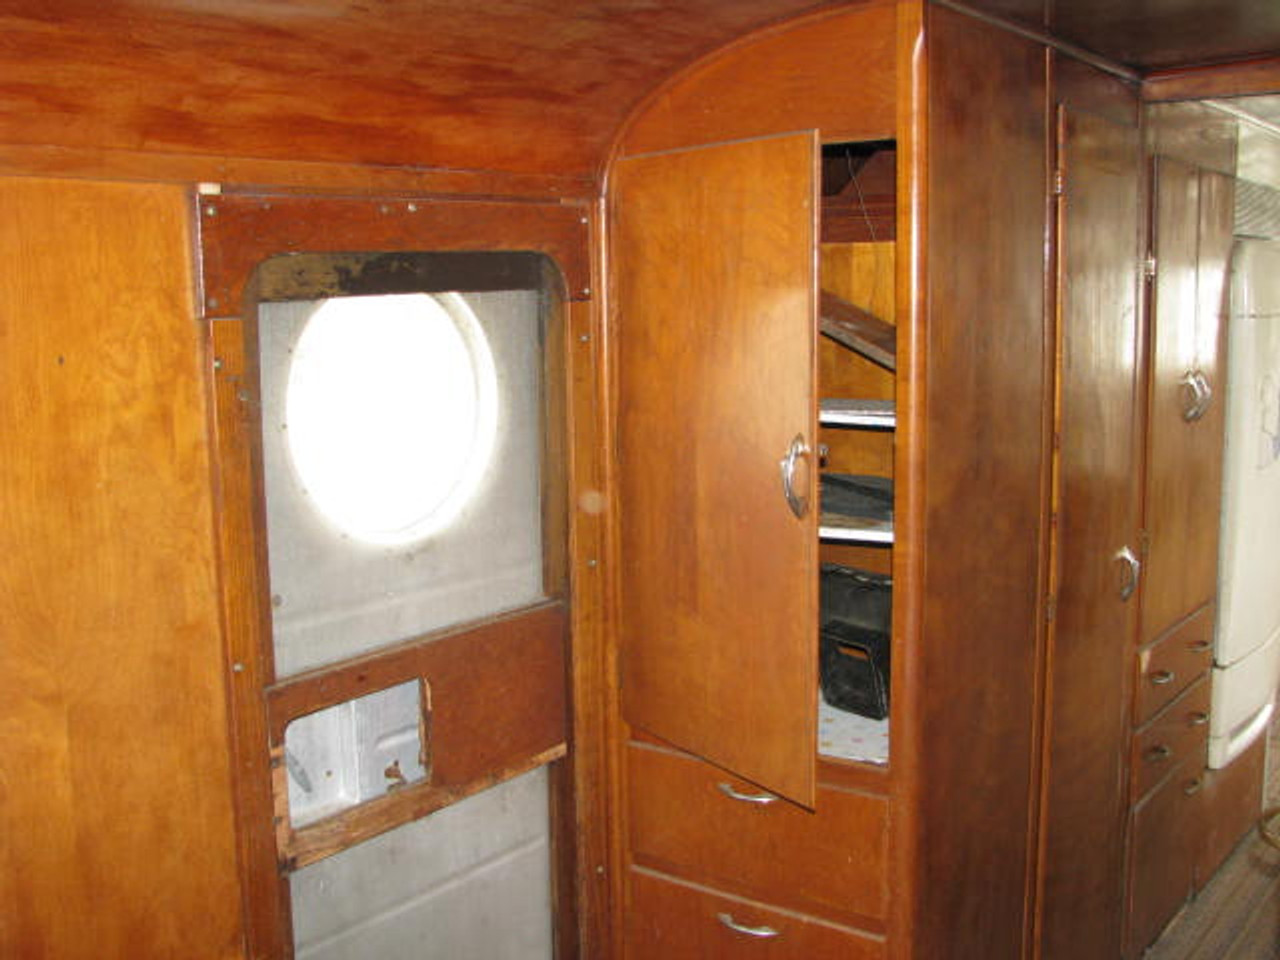 1951 Spartan 36 Ft. Imperial Mansion #A1393  (SOLD S.F.)